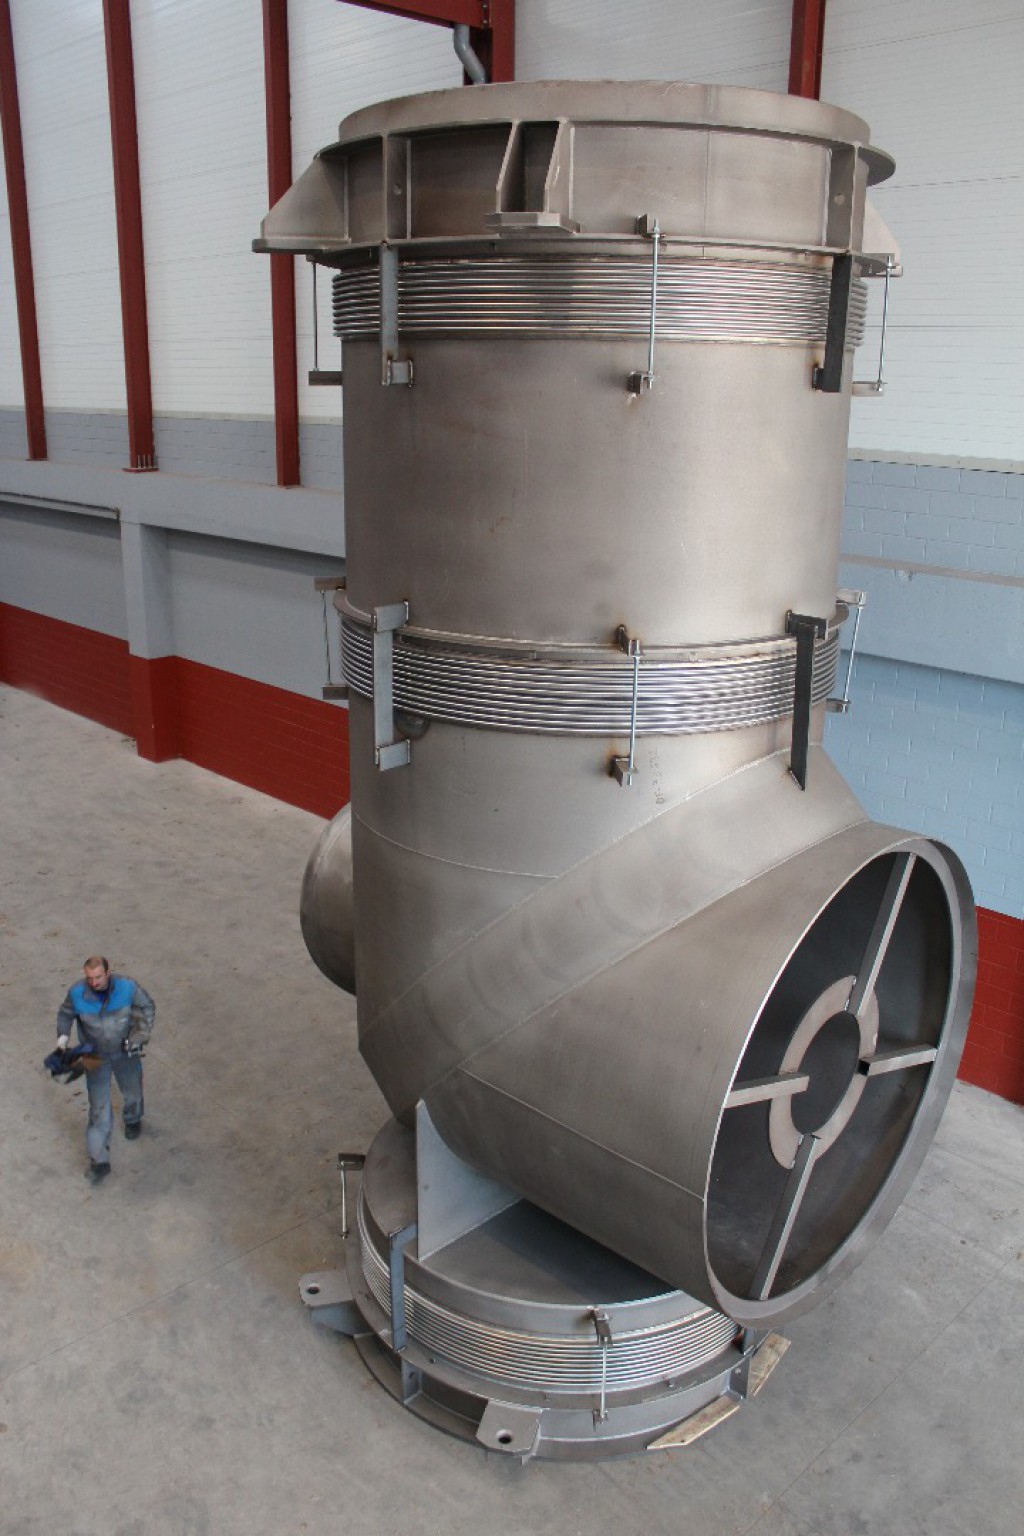 Large Pressure Balanced Expansion Joint delivered to a Waste to Energy facility in the UK